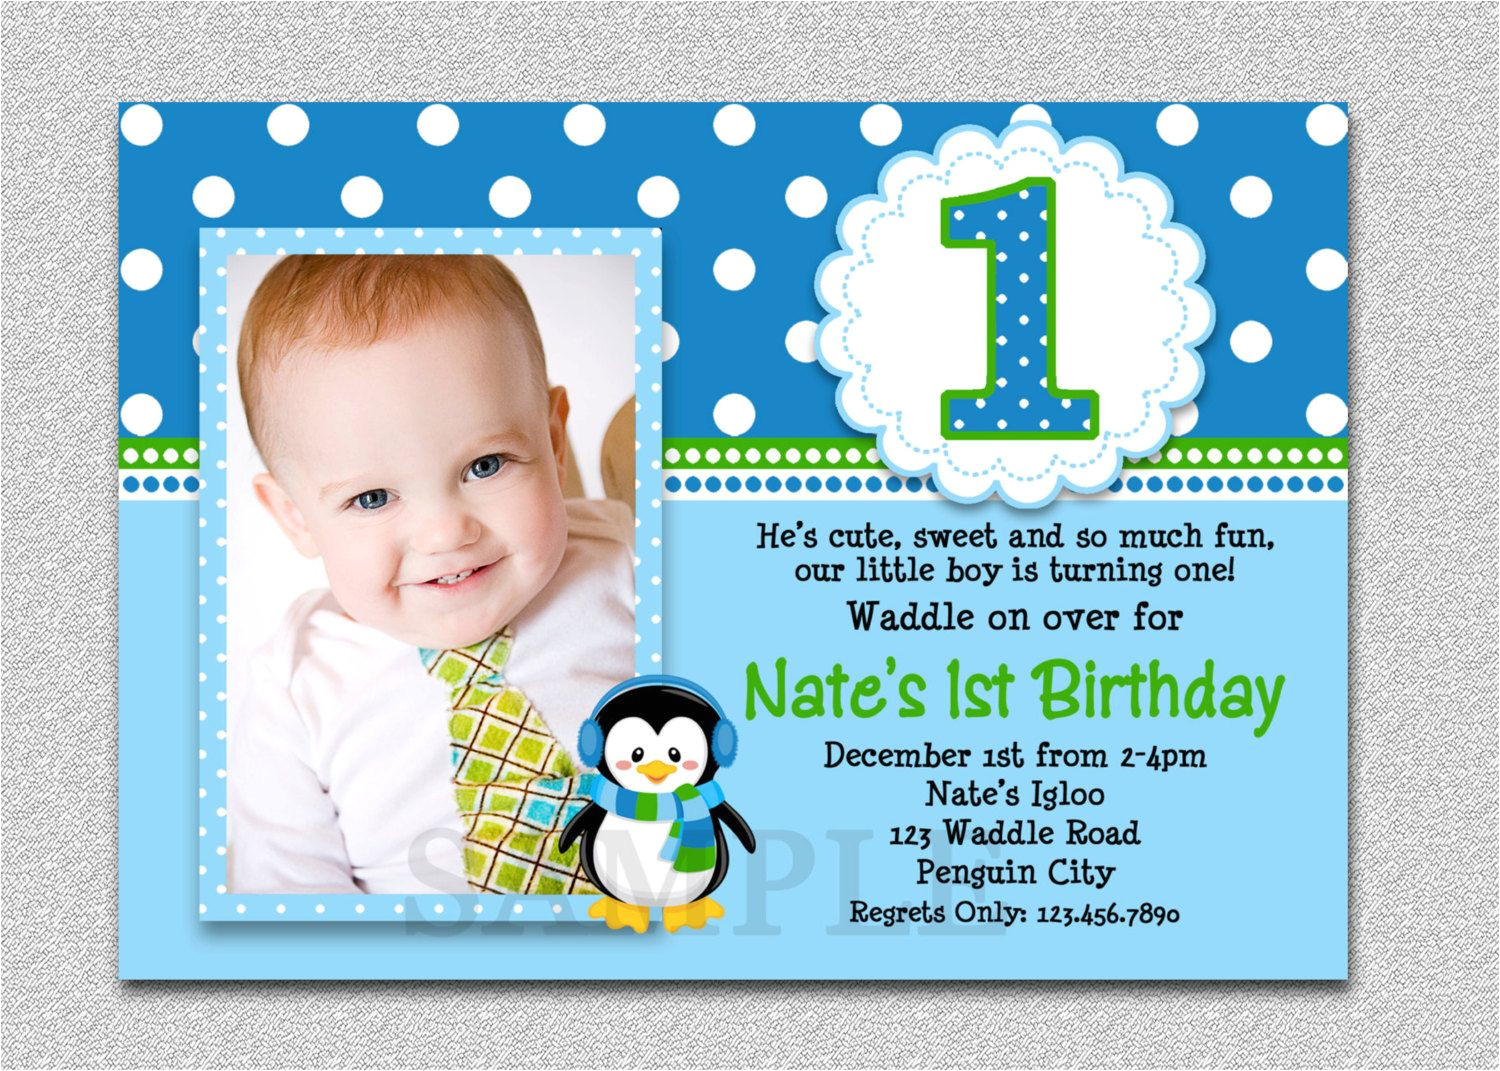 Example Of Invitation Card for 1st Birthday 1st Birthday Invitations Stuff to Buy Photo Birthday